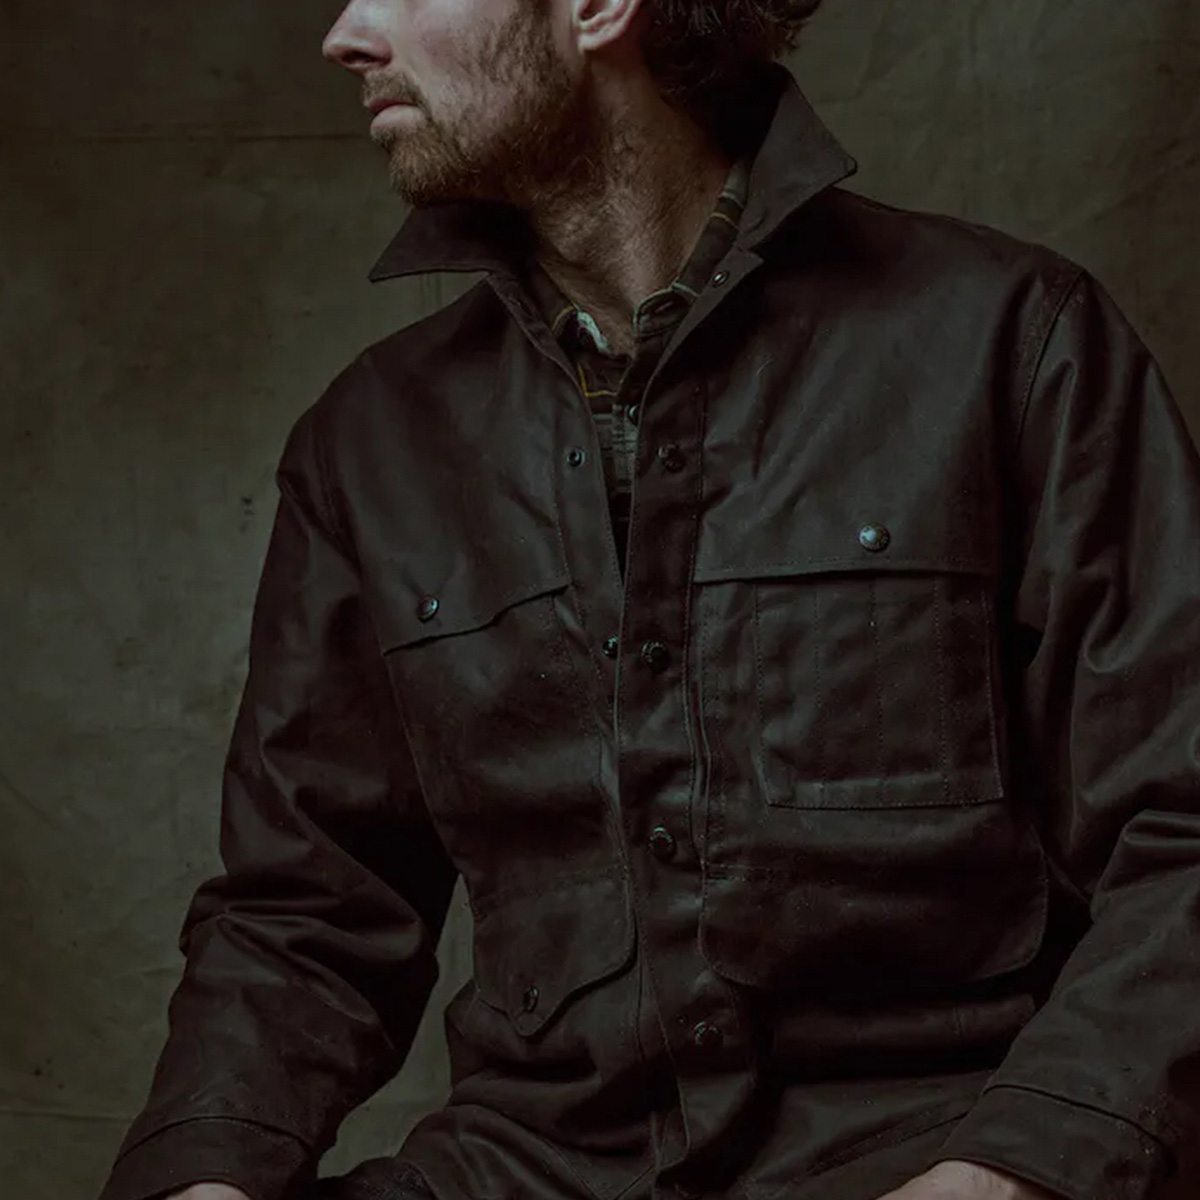 Filson Lined Tin Cloth Cruiser Jacket Cinder, a classic Cruiser that has provided tough-as-nails protection in the field